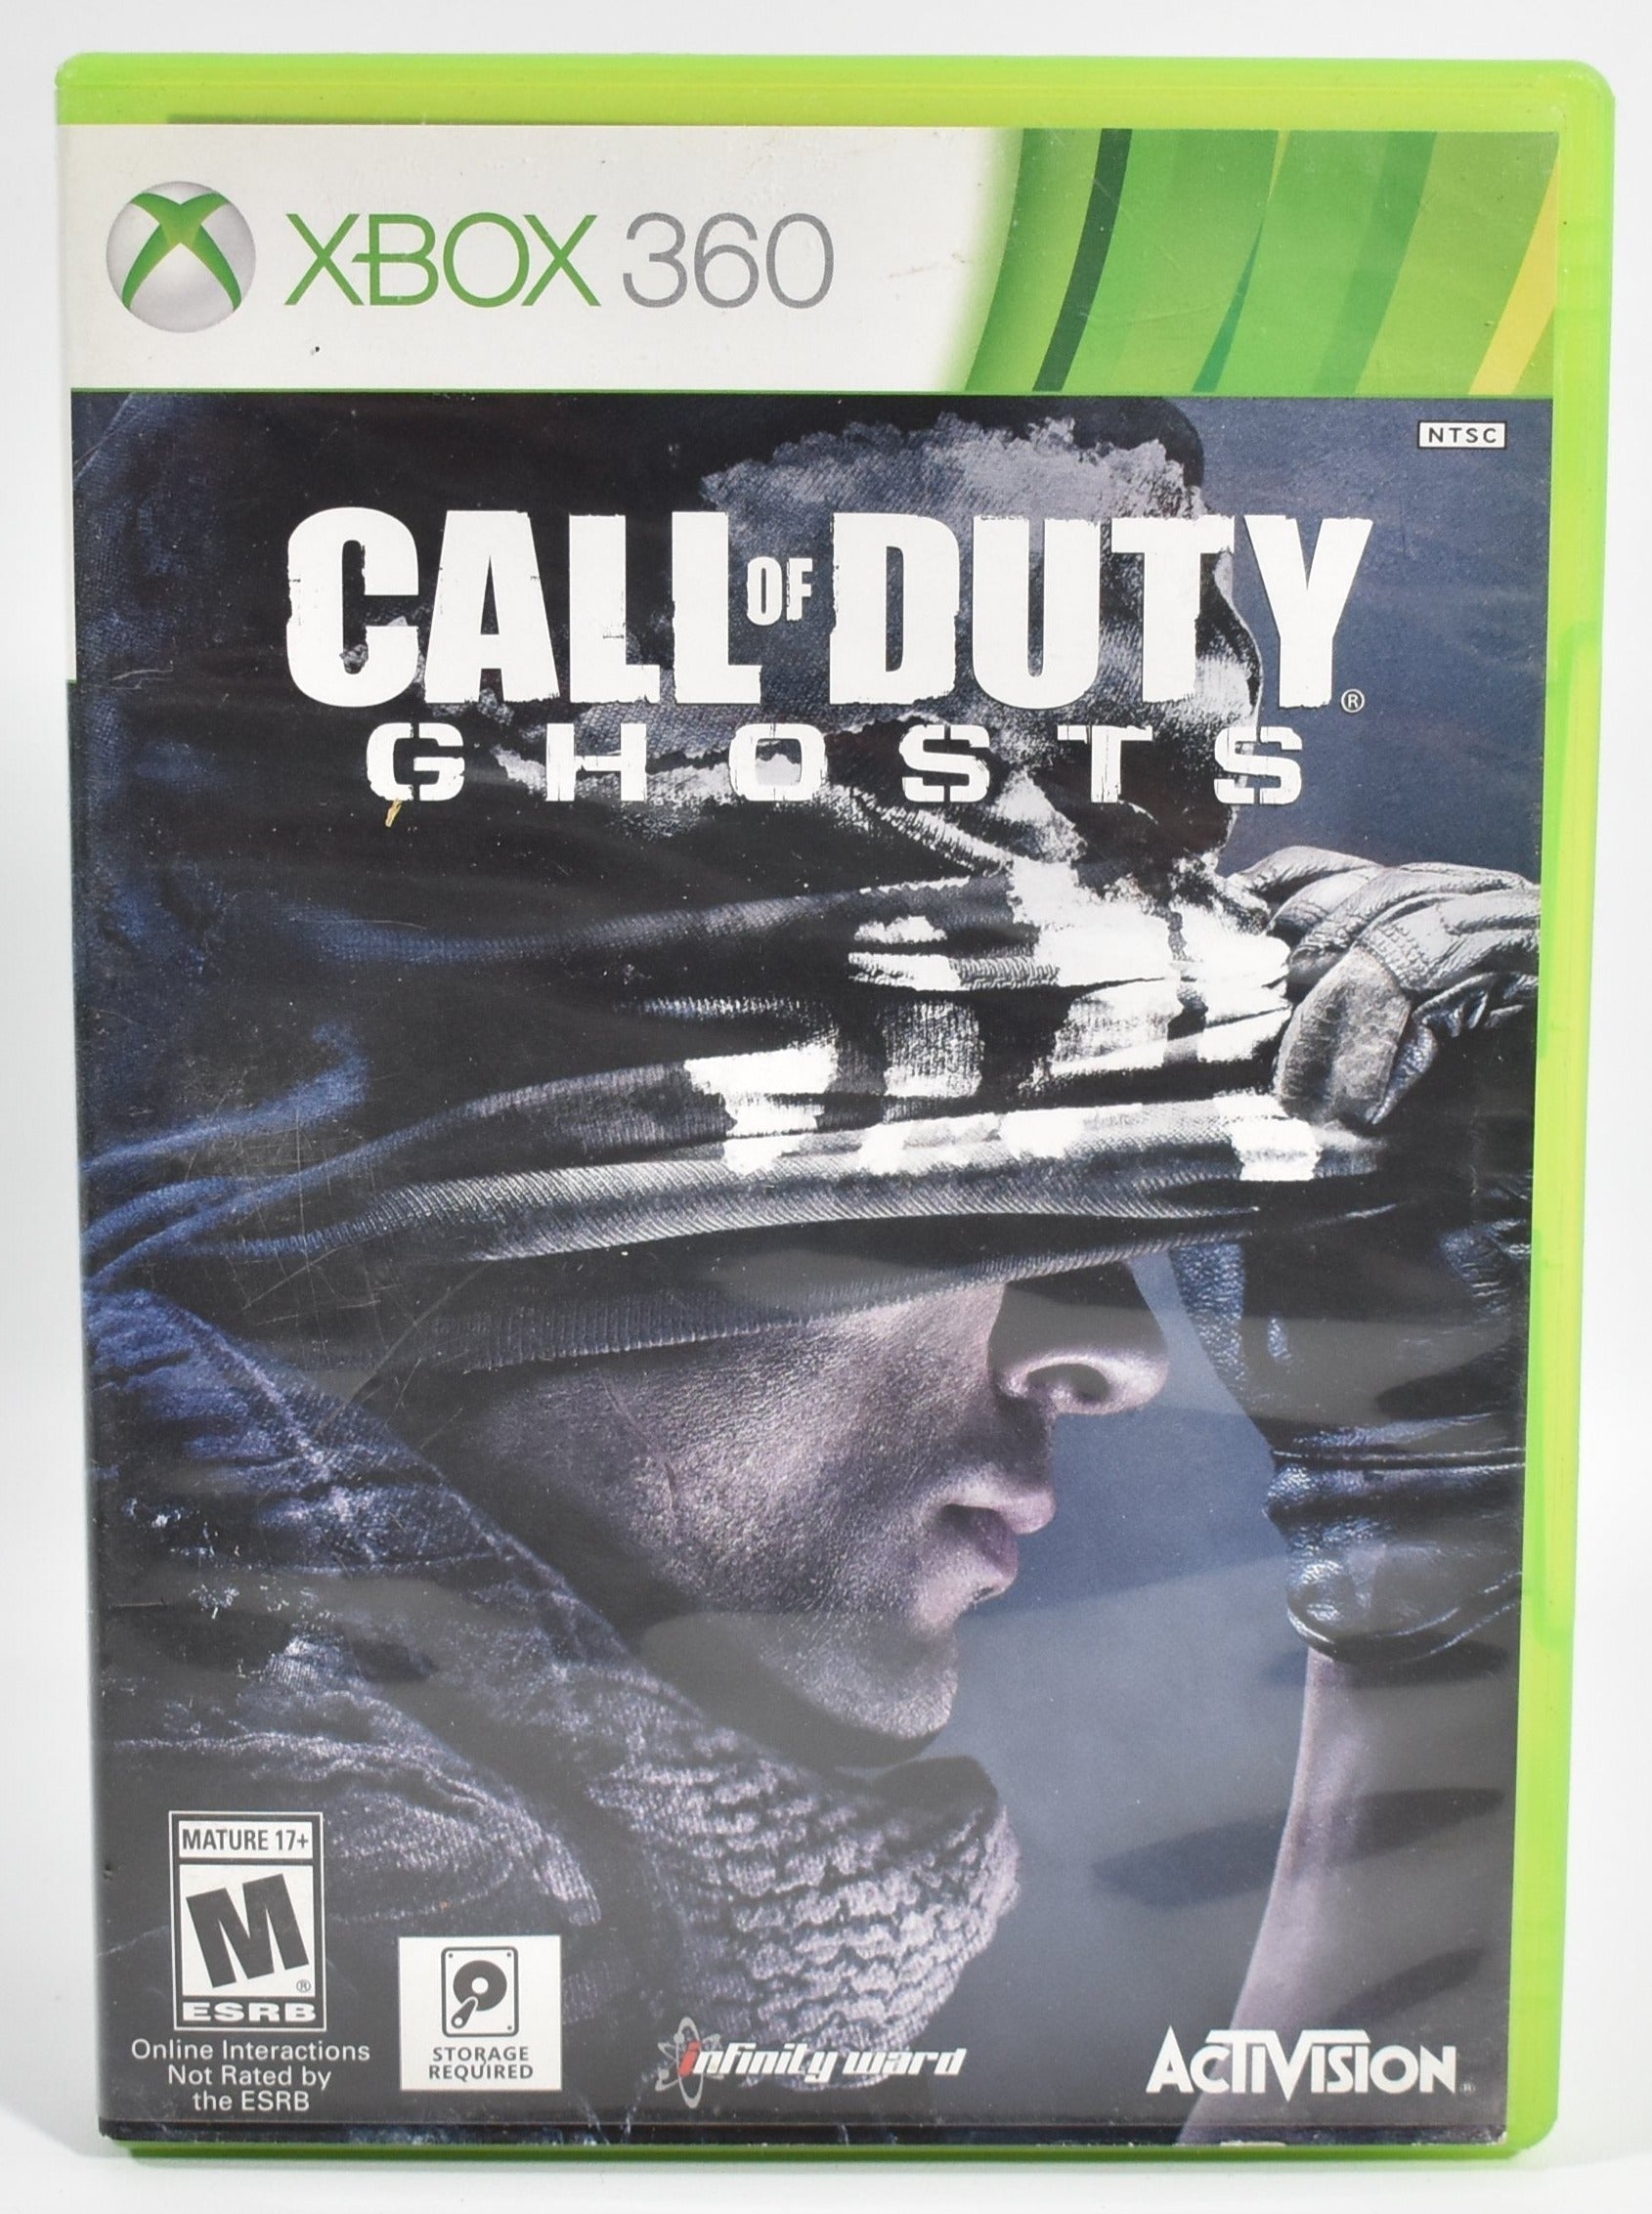 Xbox 360 Video Game Call of duty Ghost USED